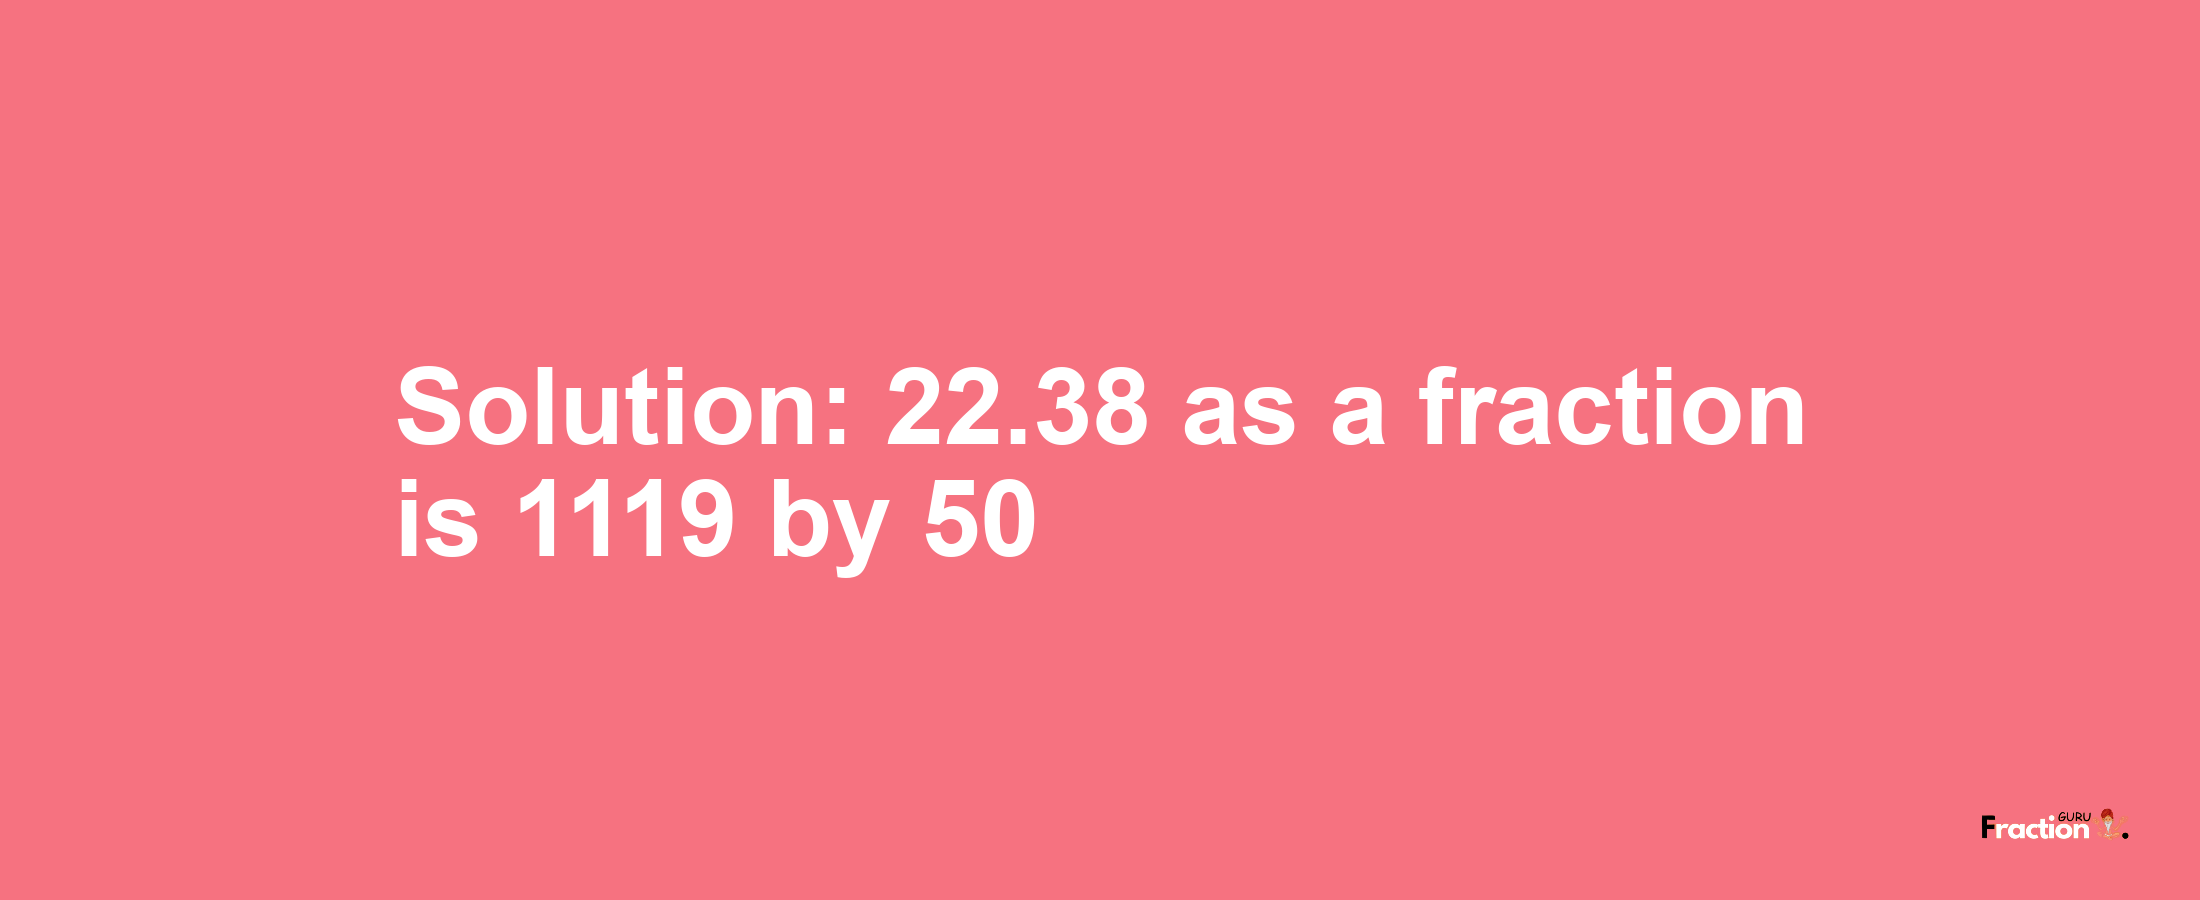 Solution:22.38 as a fraction is 1119/50